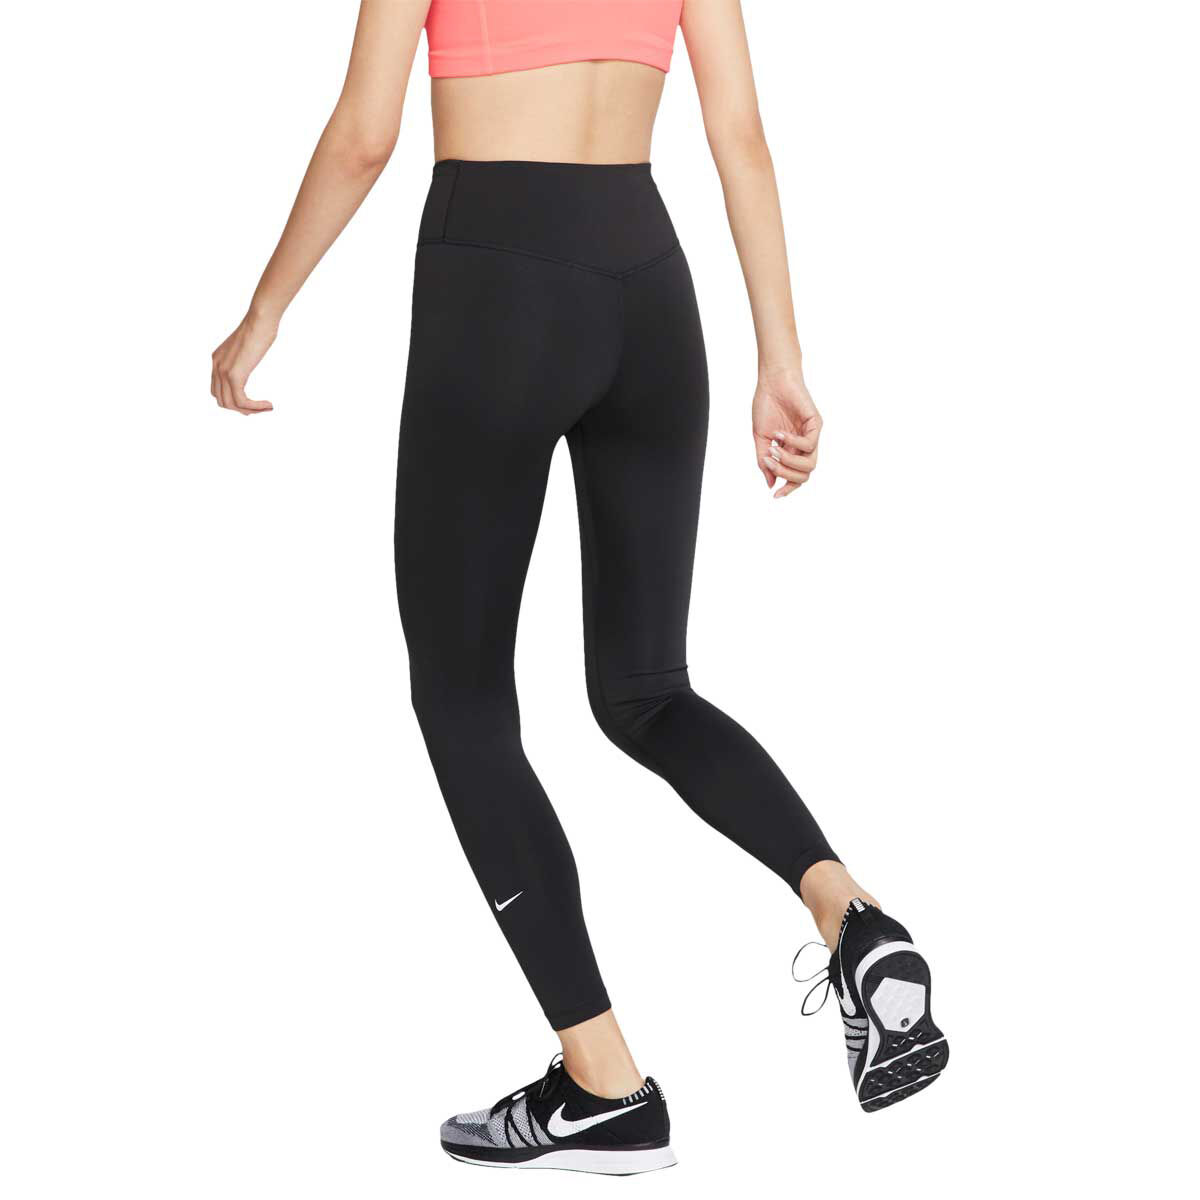 women's nike one tights